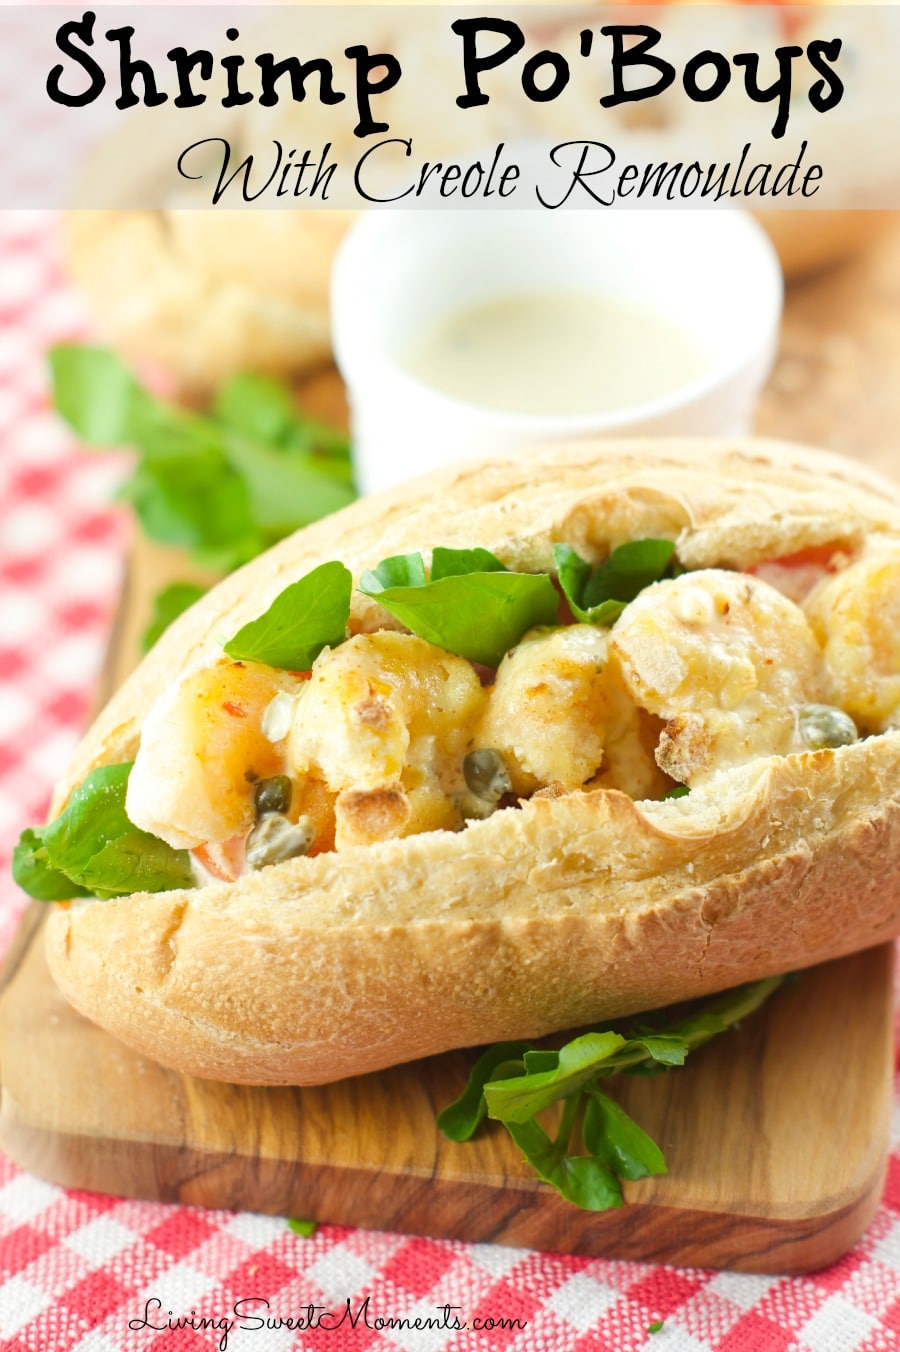 Shrimp Po'boys - served with a delicious creole Remoulade sauce. Shrimp is battered in cornmeal and oven fried to perfection. A perfect addition to your Mardi Gras celebration